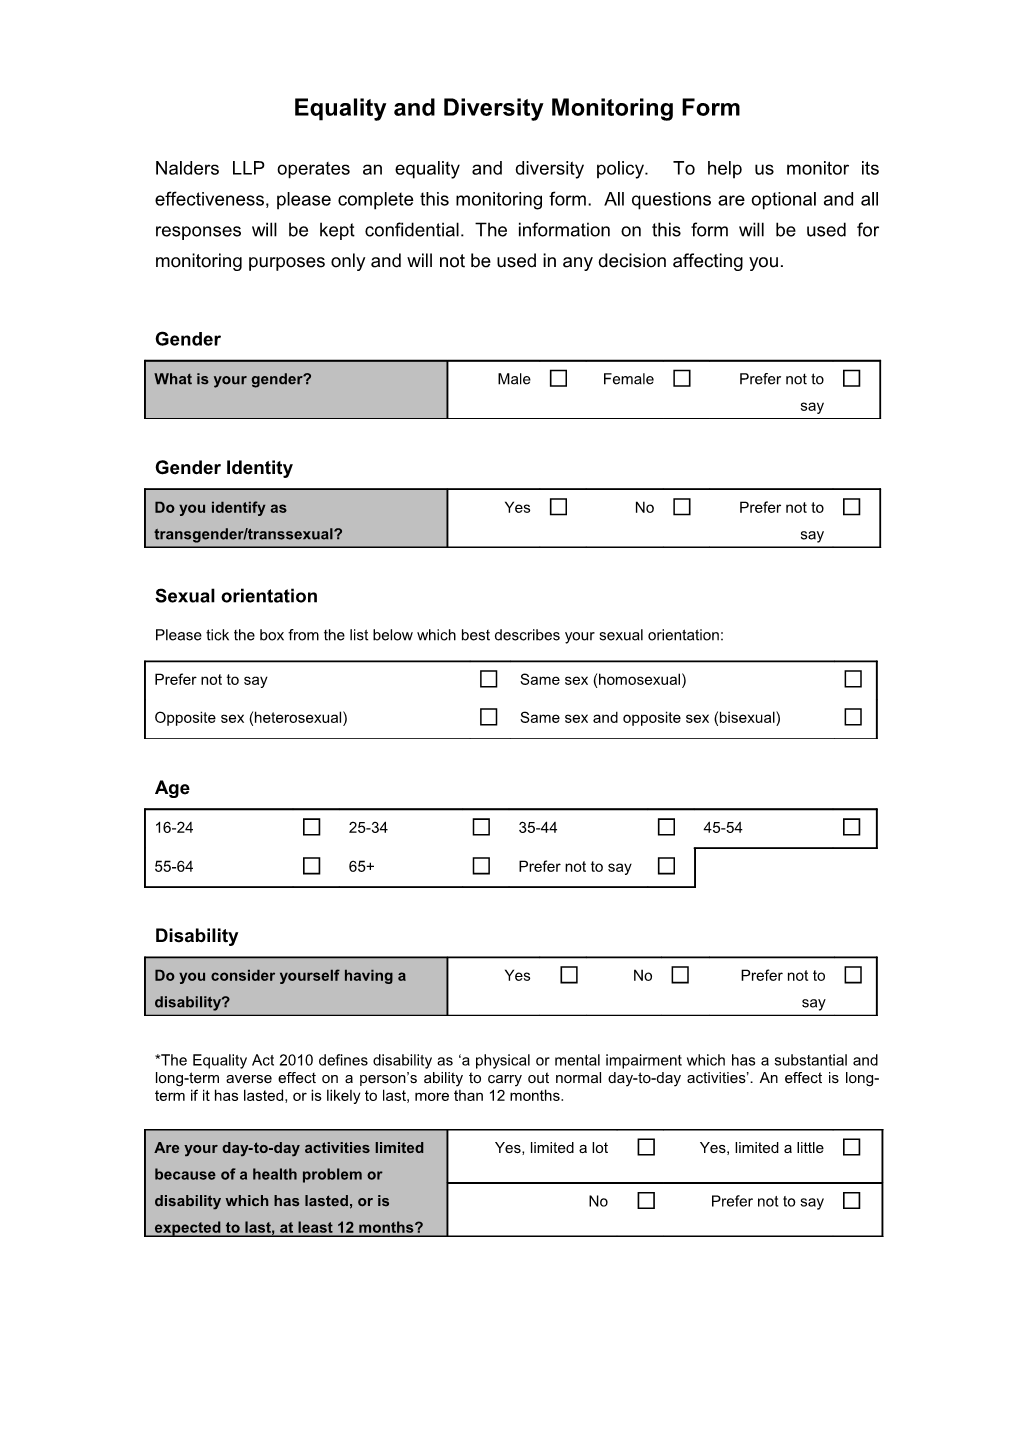 Equality and Diversity Monitoring Form s1